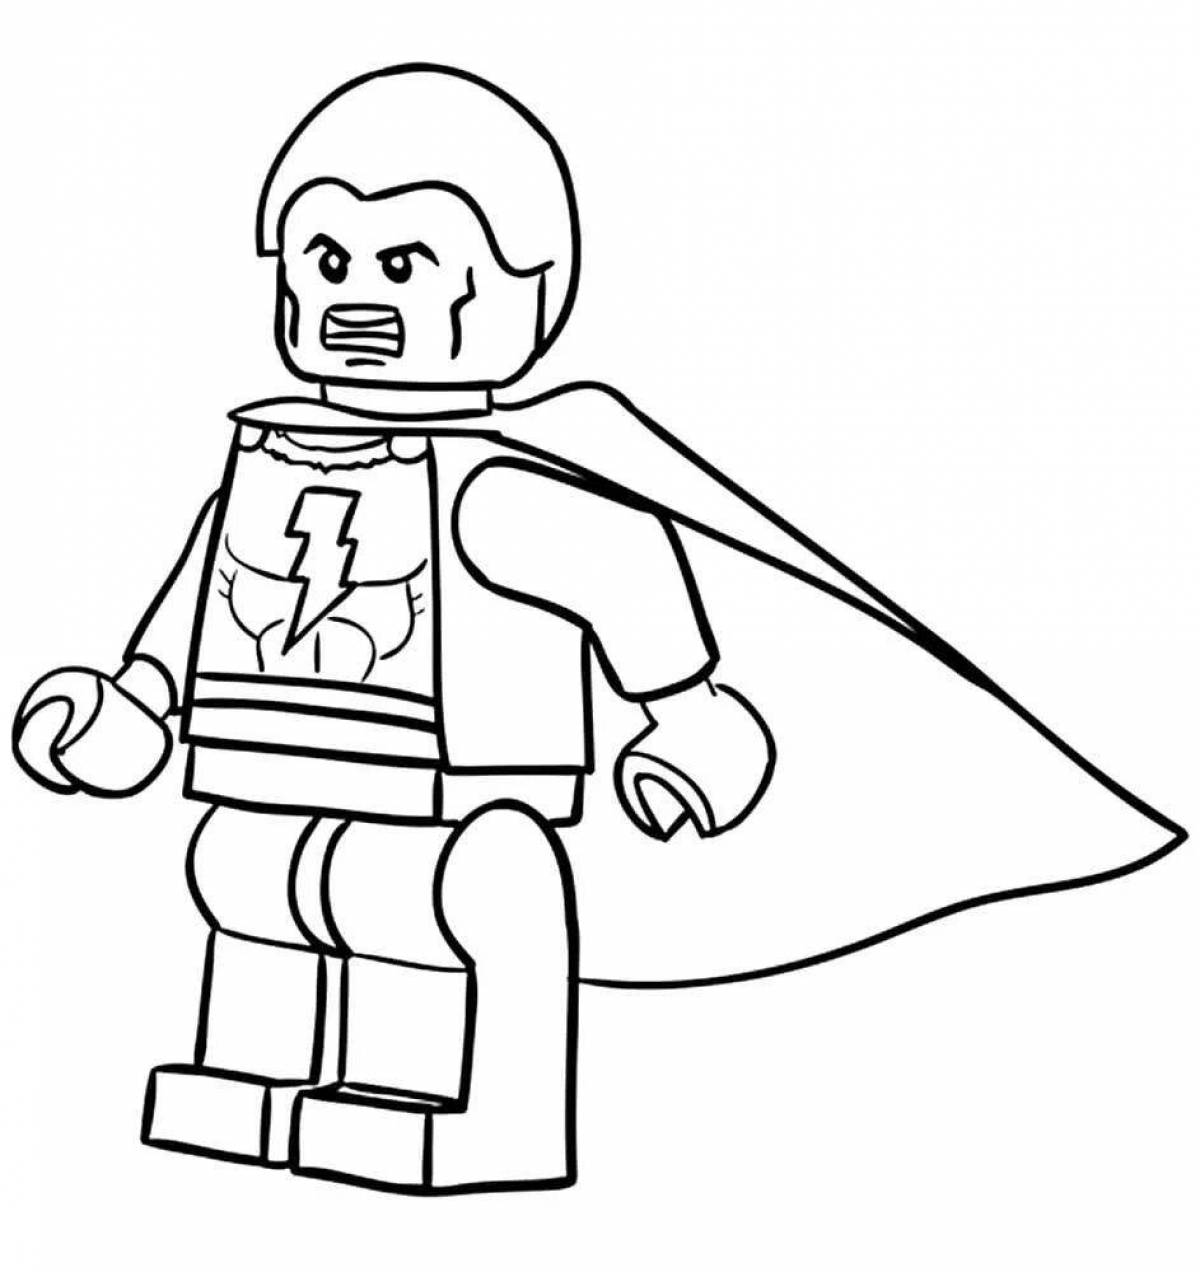 Cute lego flash coloring page